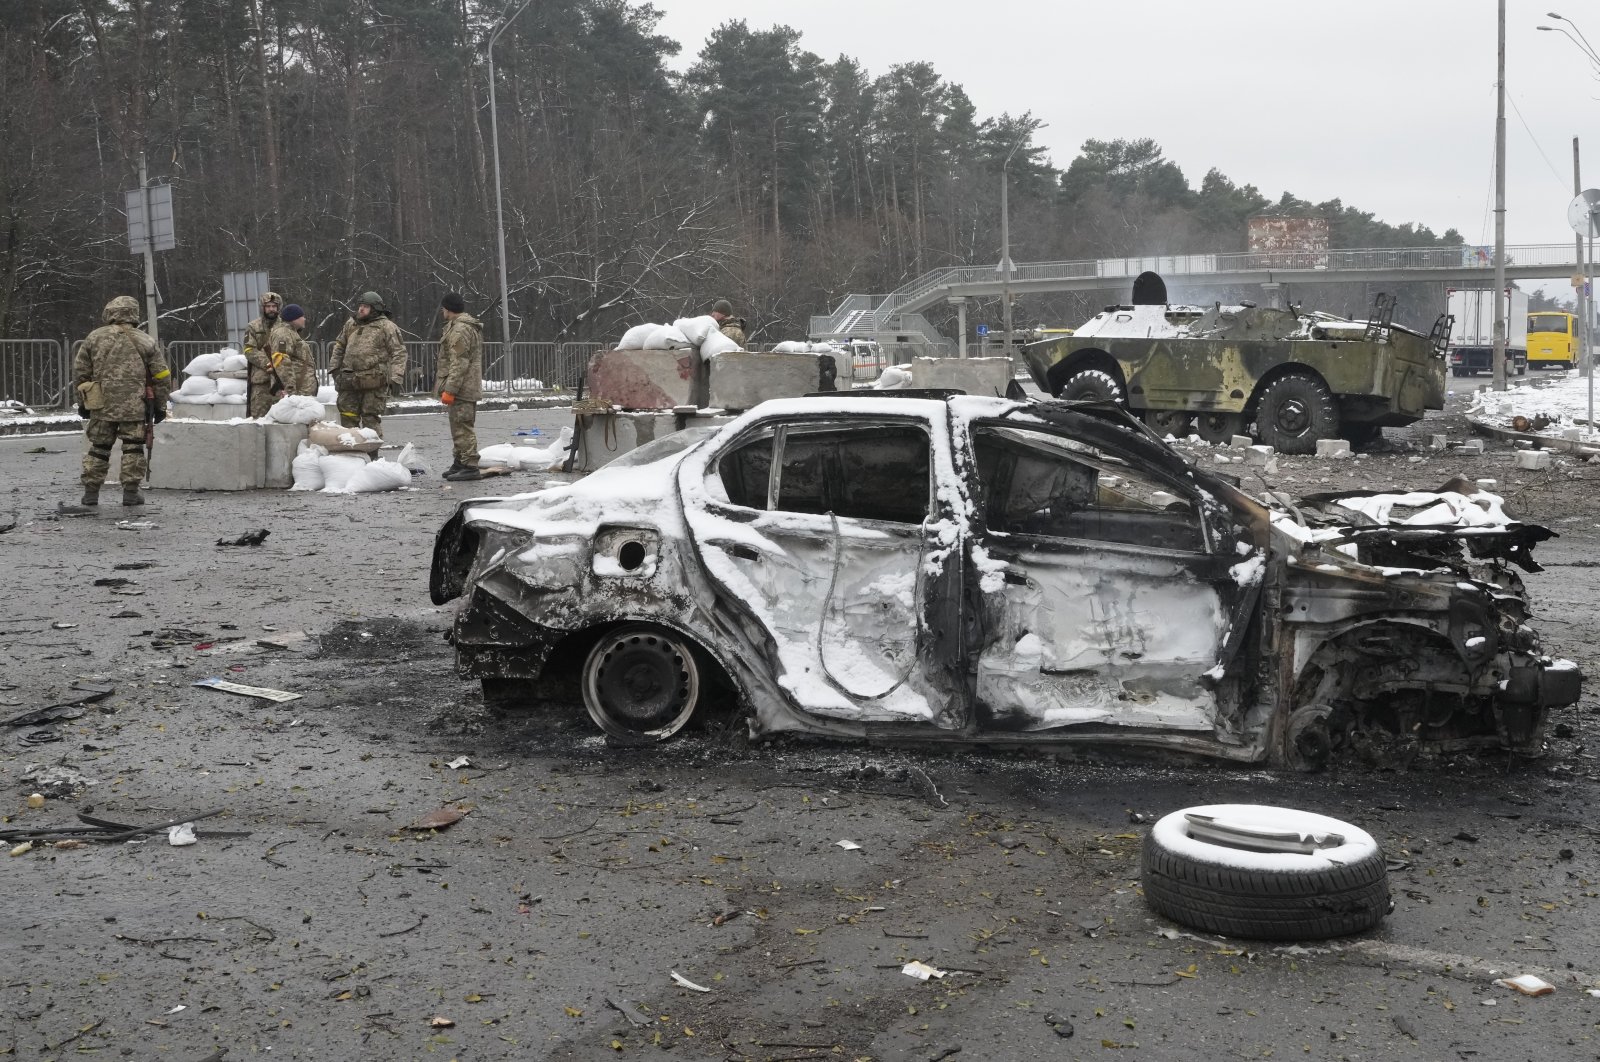 Ukrainian service members stand near a damaged car and an armored vehicle at a checkpoint in Brovary, outside Kyiv, Ukraine, March 1, 2022. (AP Photo)